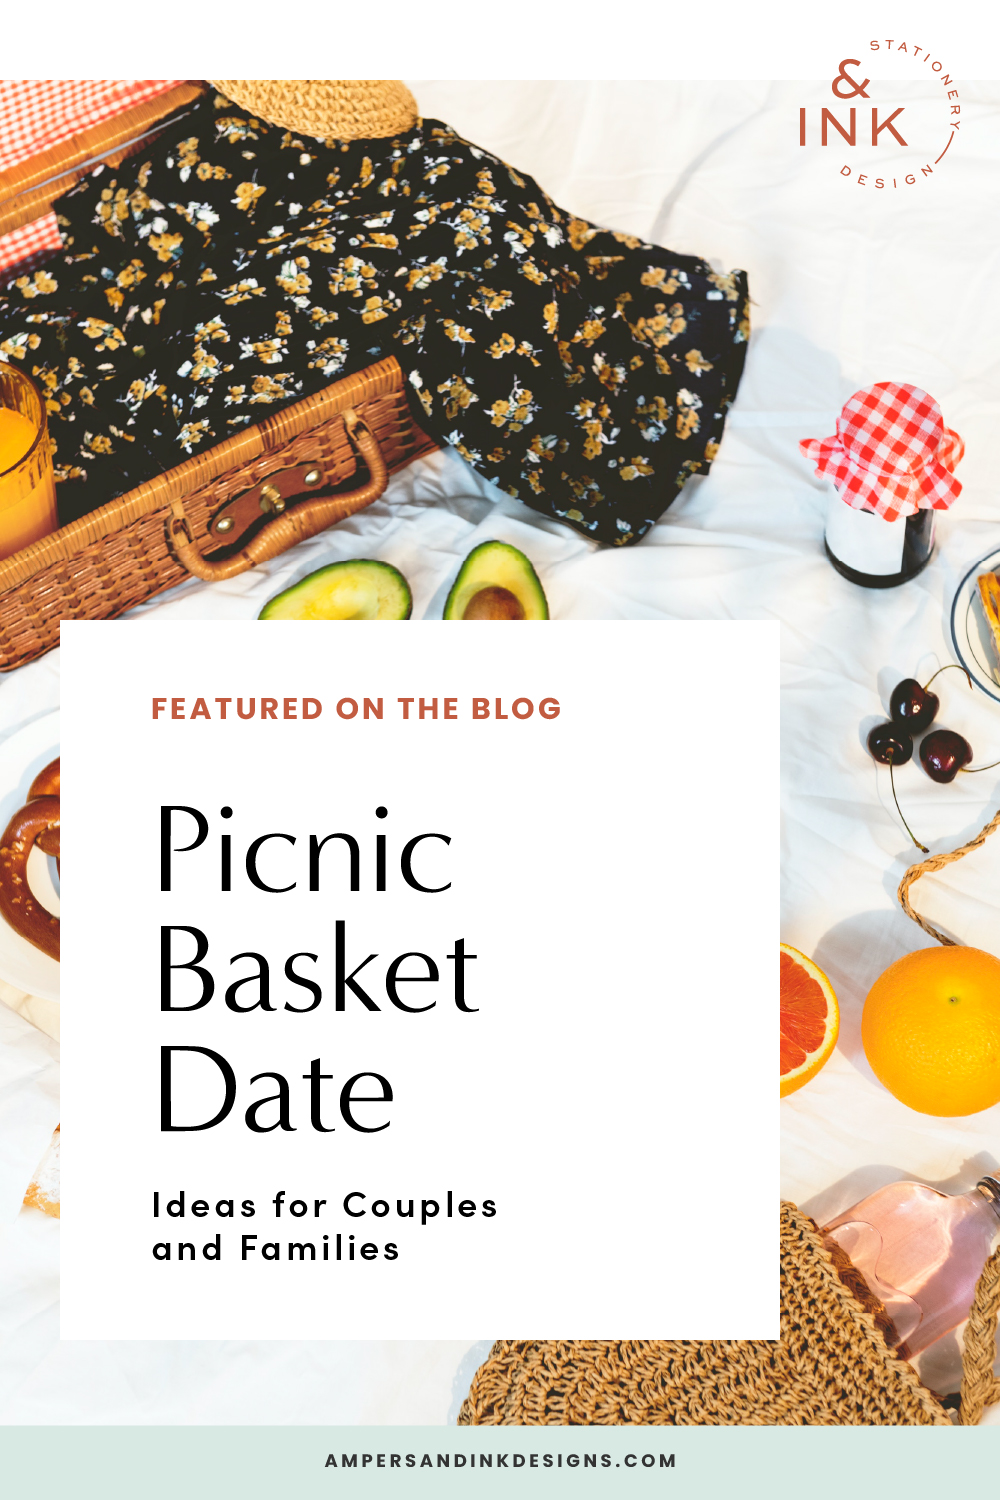 Picnic Basket Date for At Home or Away